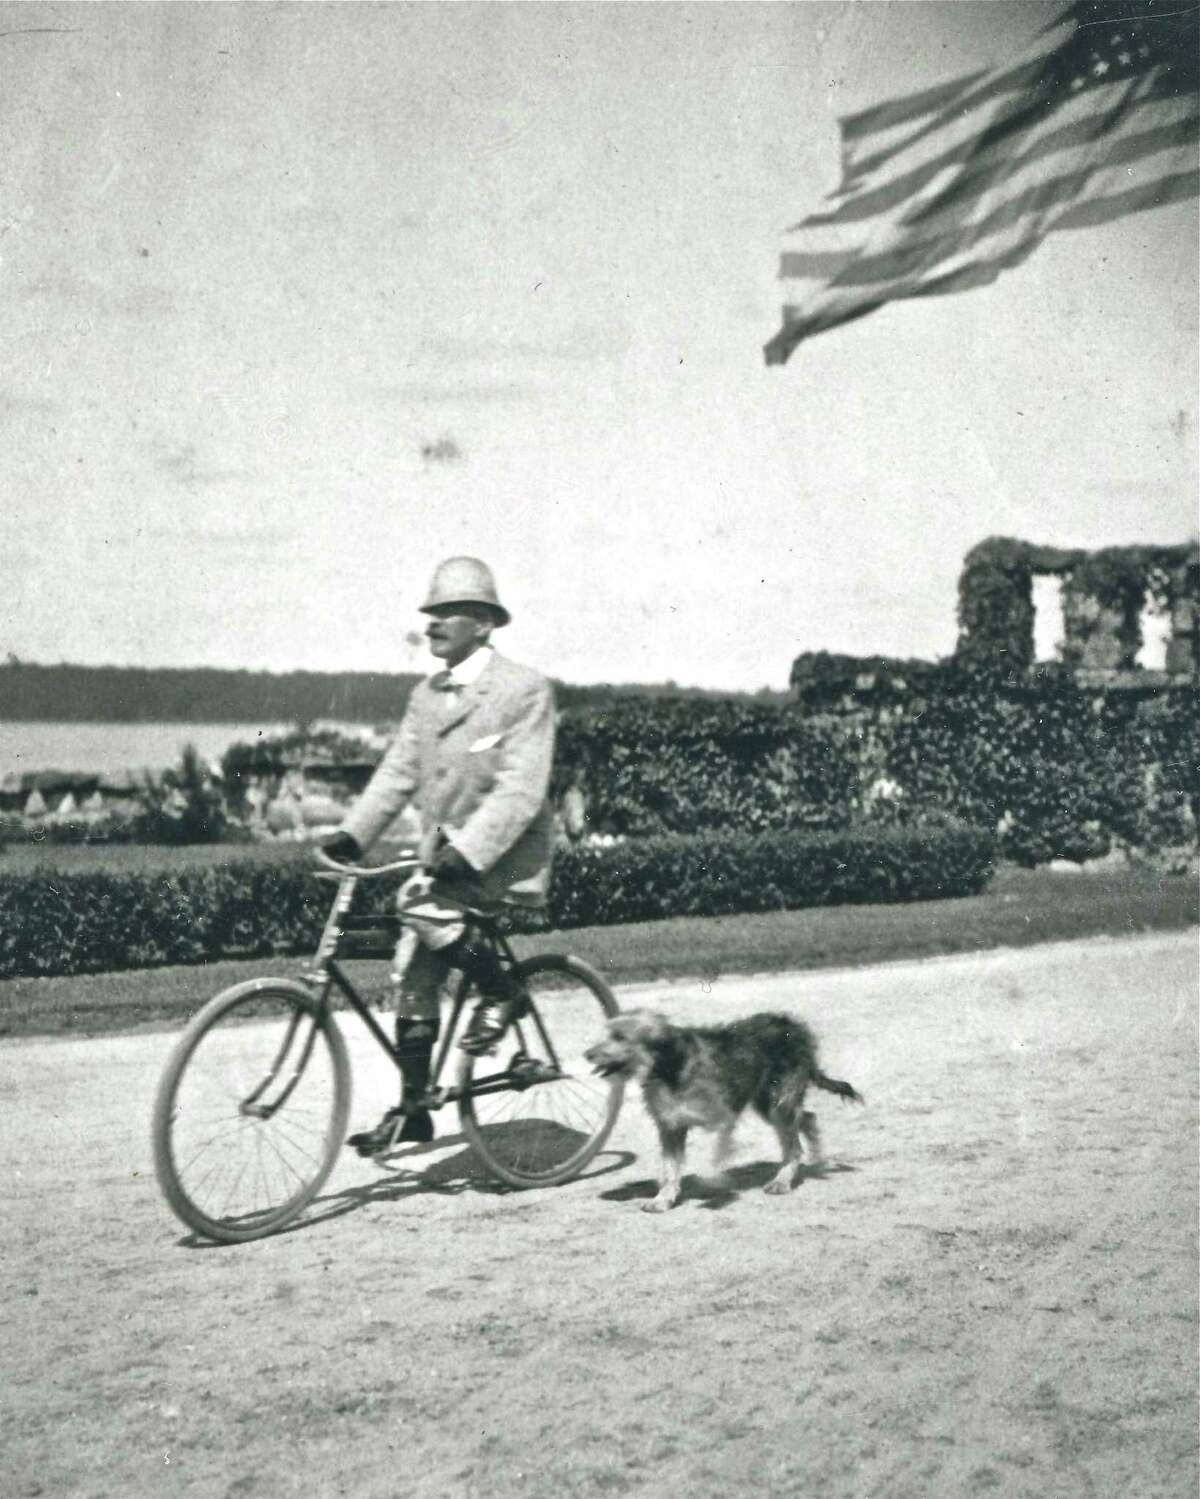 The Greenwich Historical Society will sponsor a "Greenwich Point History on Wheels" family bike tour on Sunday, June 24. In this vintage photograph, taken circa 1900, J. Kennedy Tod is seen bicycling around his estate - on what is today Greenwich Point.